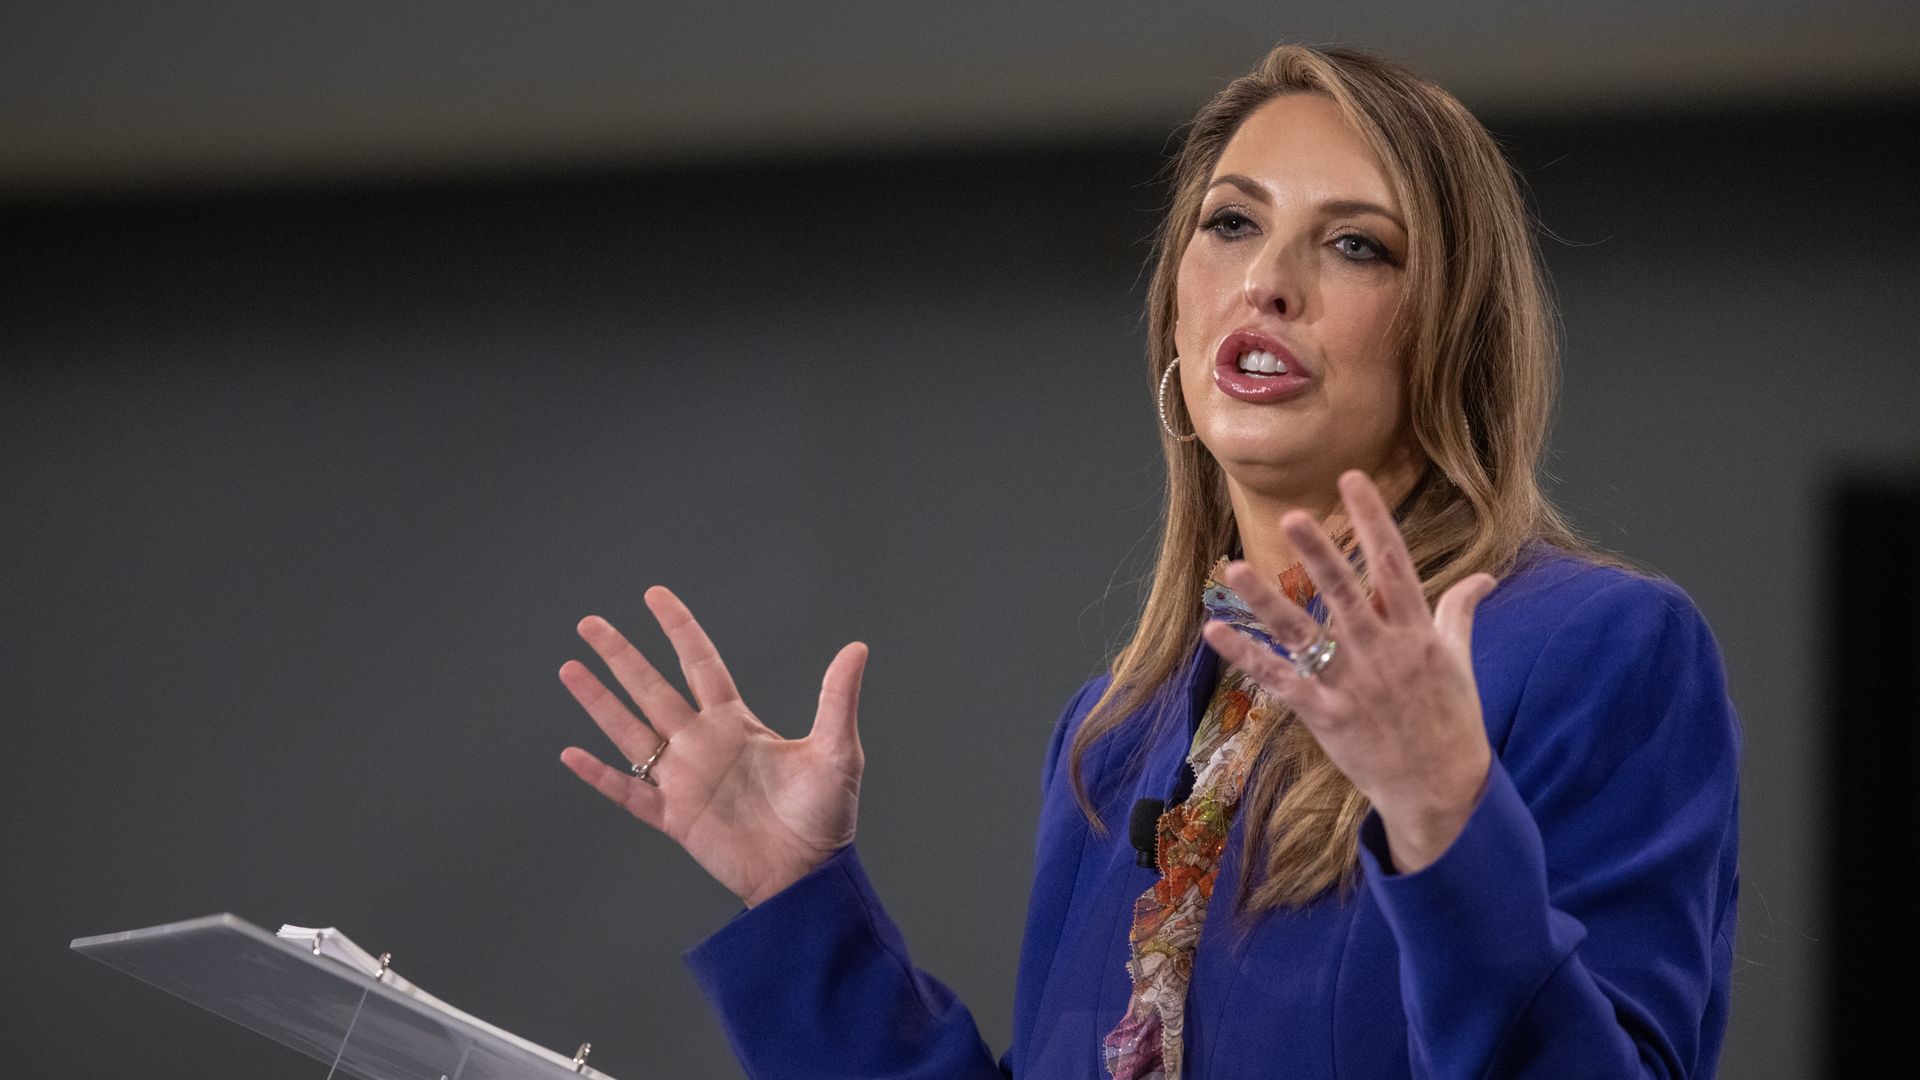 RNC Chairwoman Ronna McDaniel speaks at the Ronald Reagan Presidential Foundation & Institute's 'A Time for Choosing Speaker Series' at the Ronald Reagan Presidential Library on April 20, 2023 in Simi Valley, California